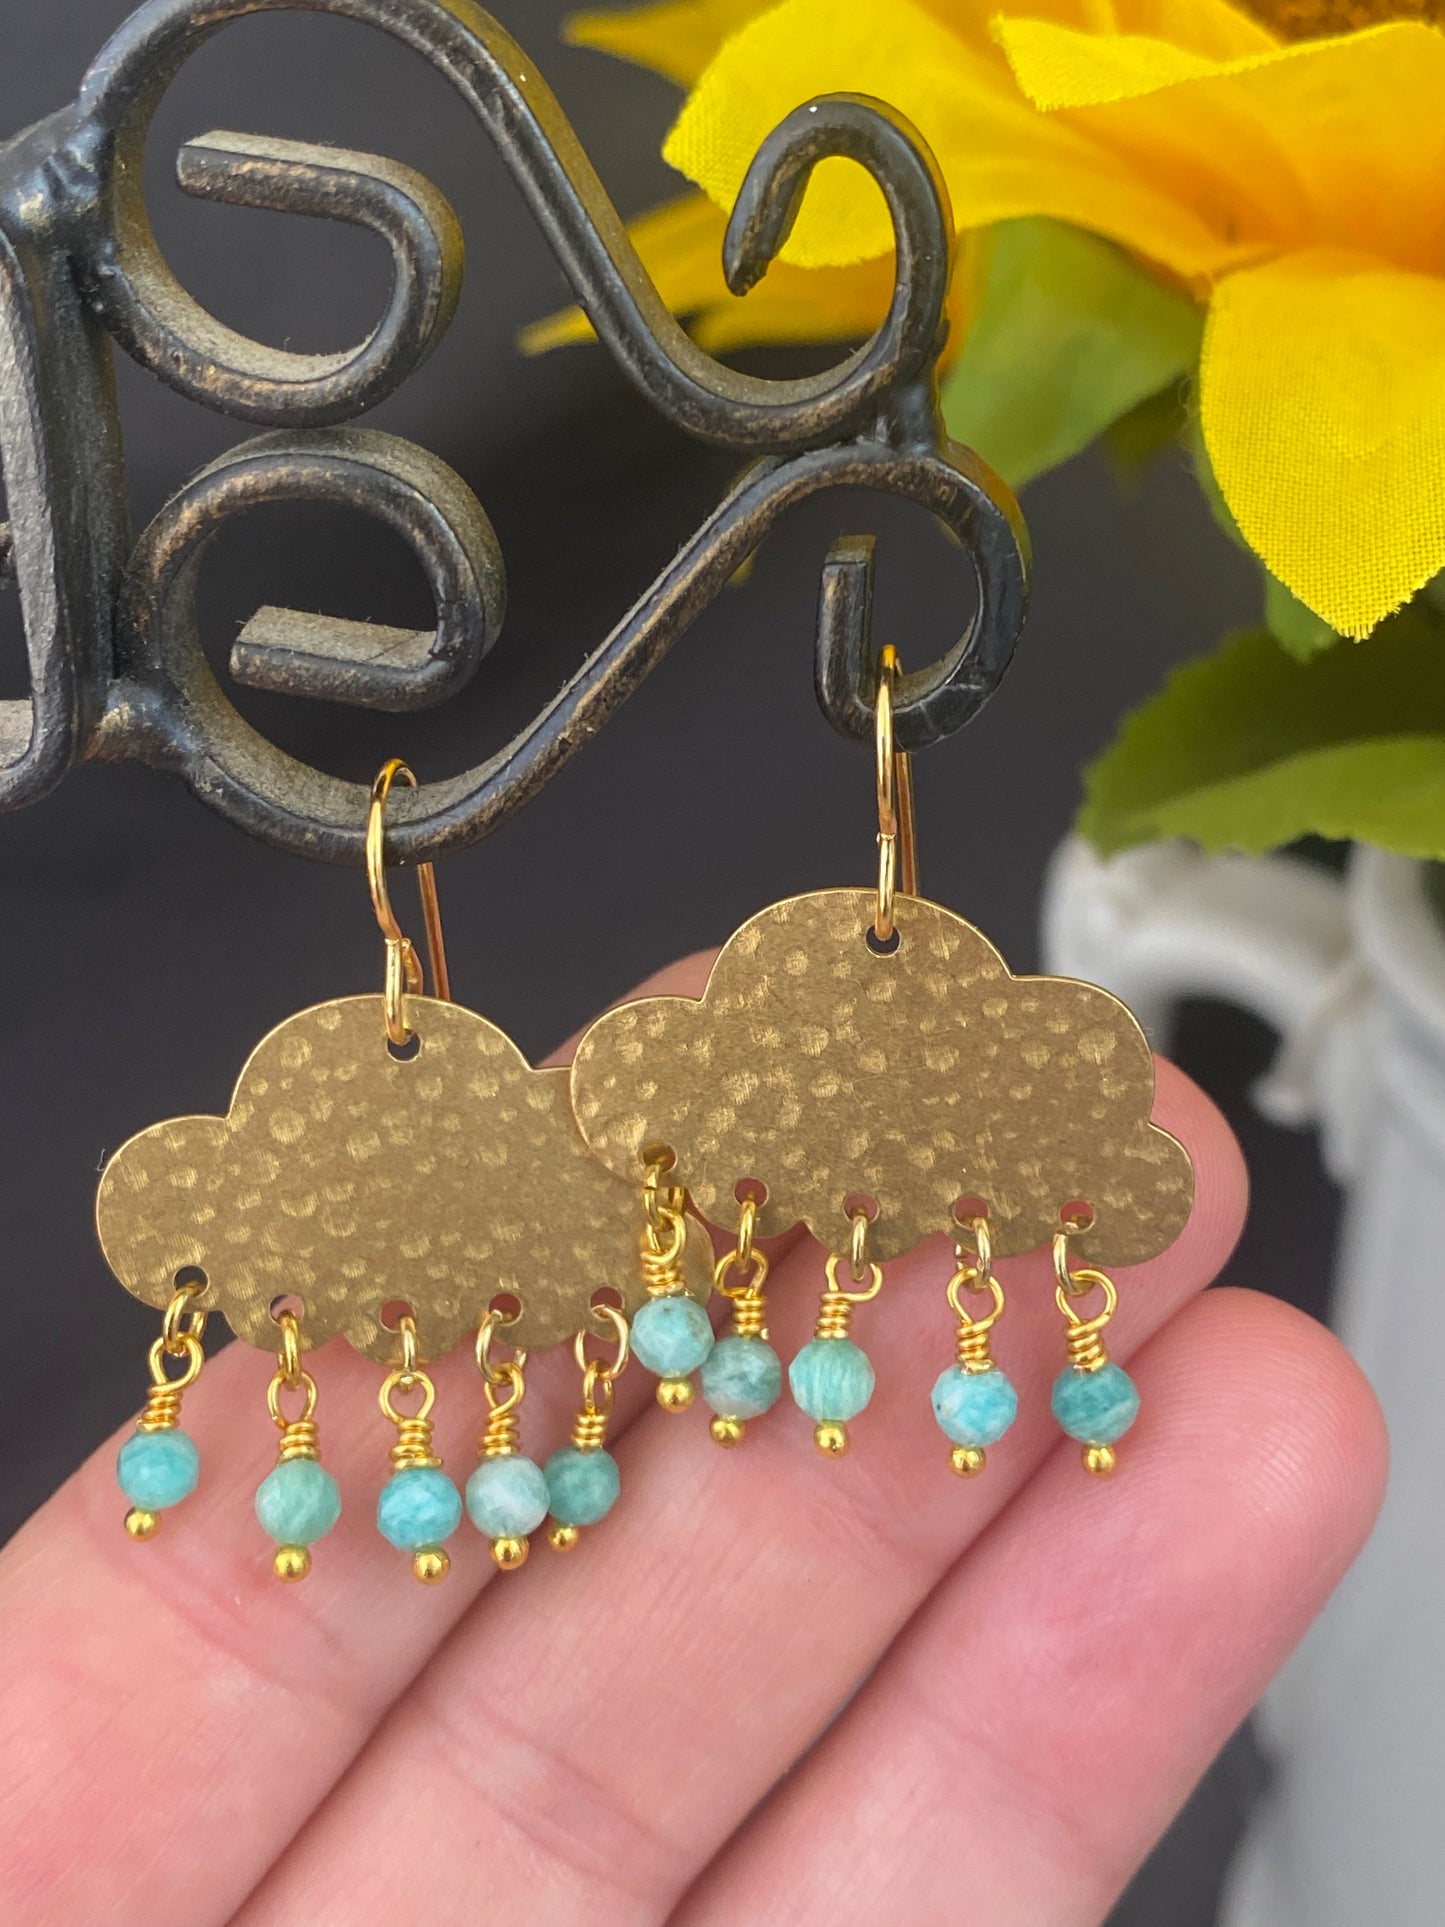 Cloud charm, Amazonite stone and gold metal, earrings